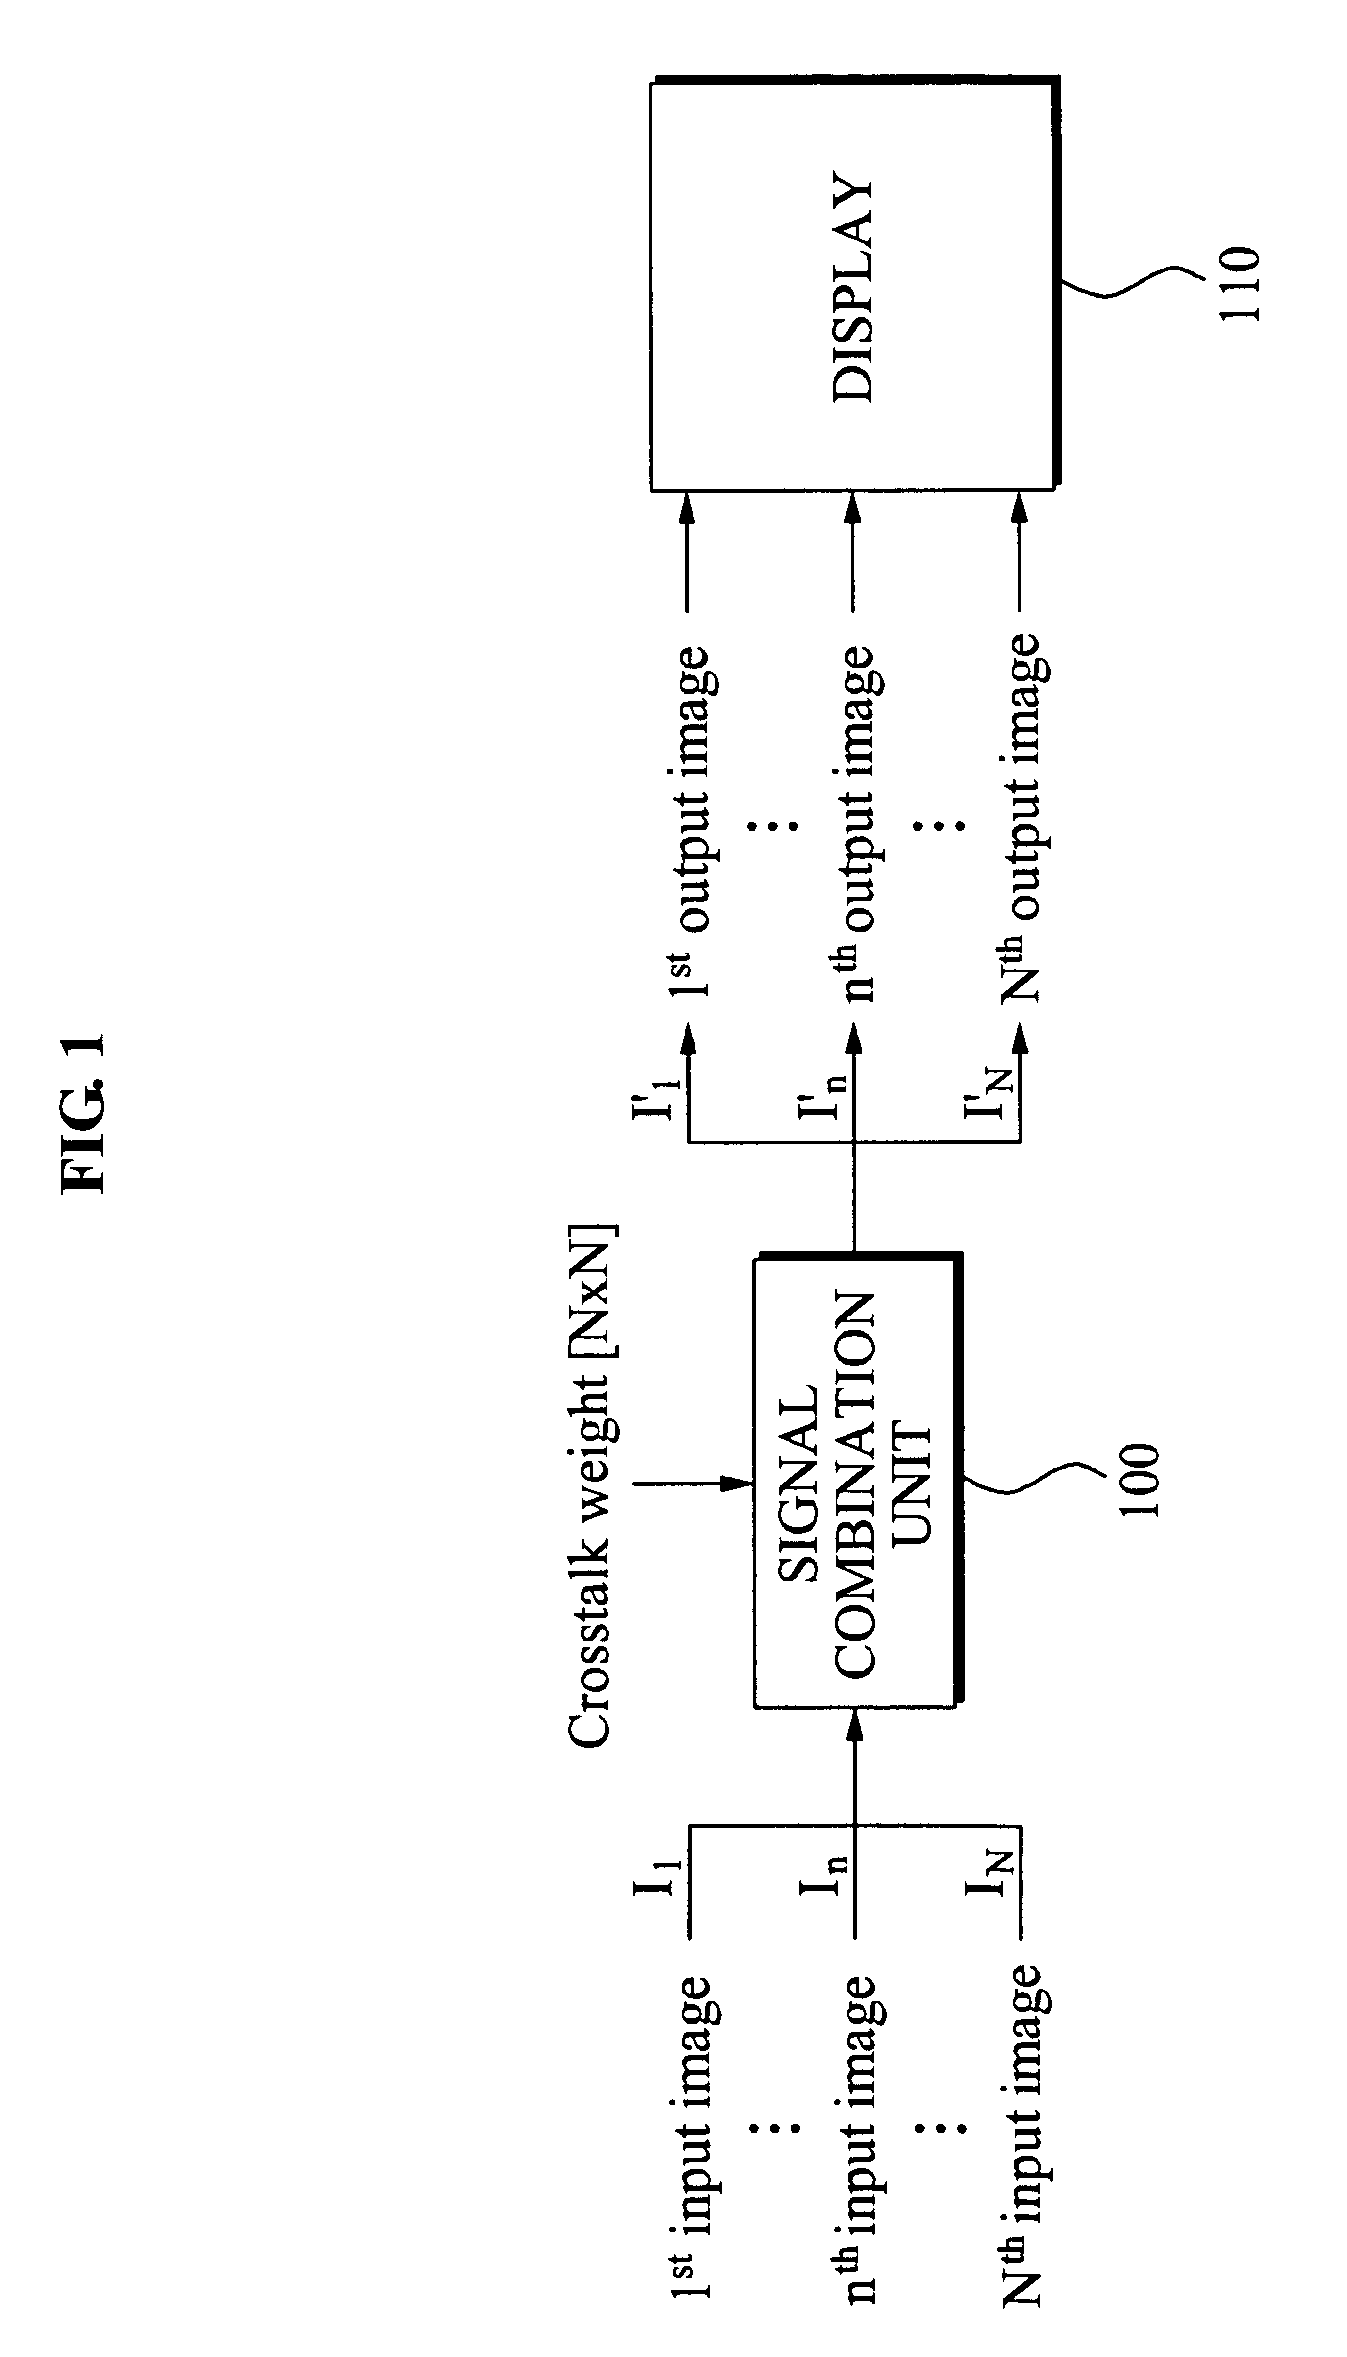 Apparatus and method for compensating for crosstalk between views in three dimensional (3D) display apparatus